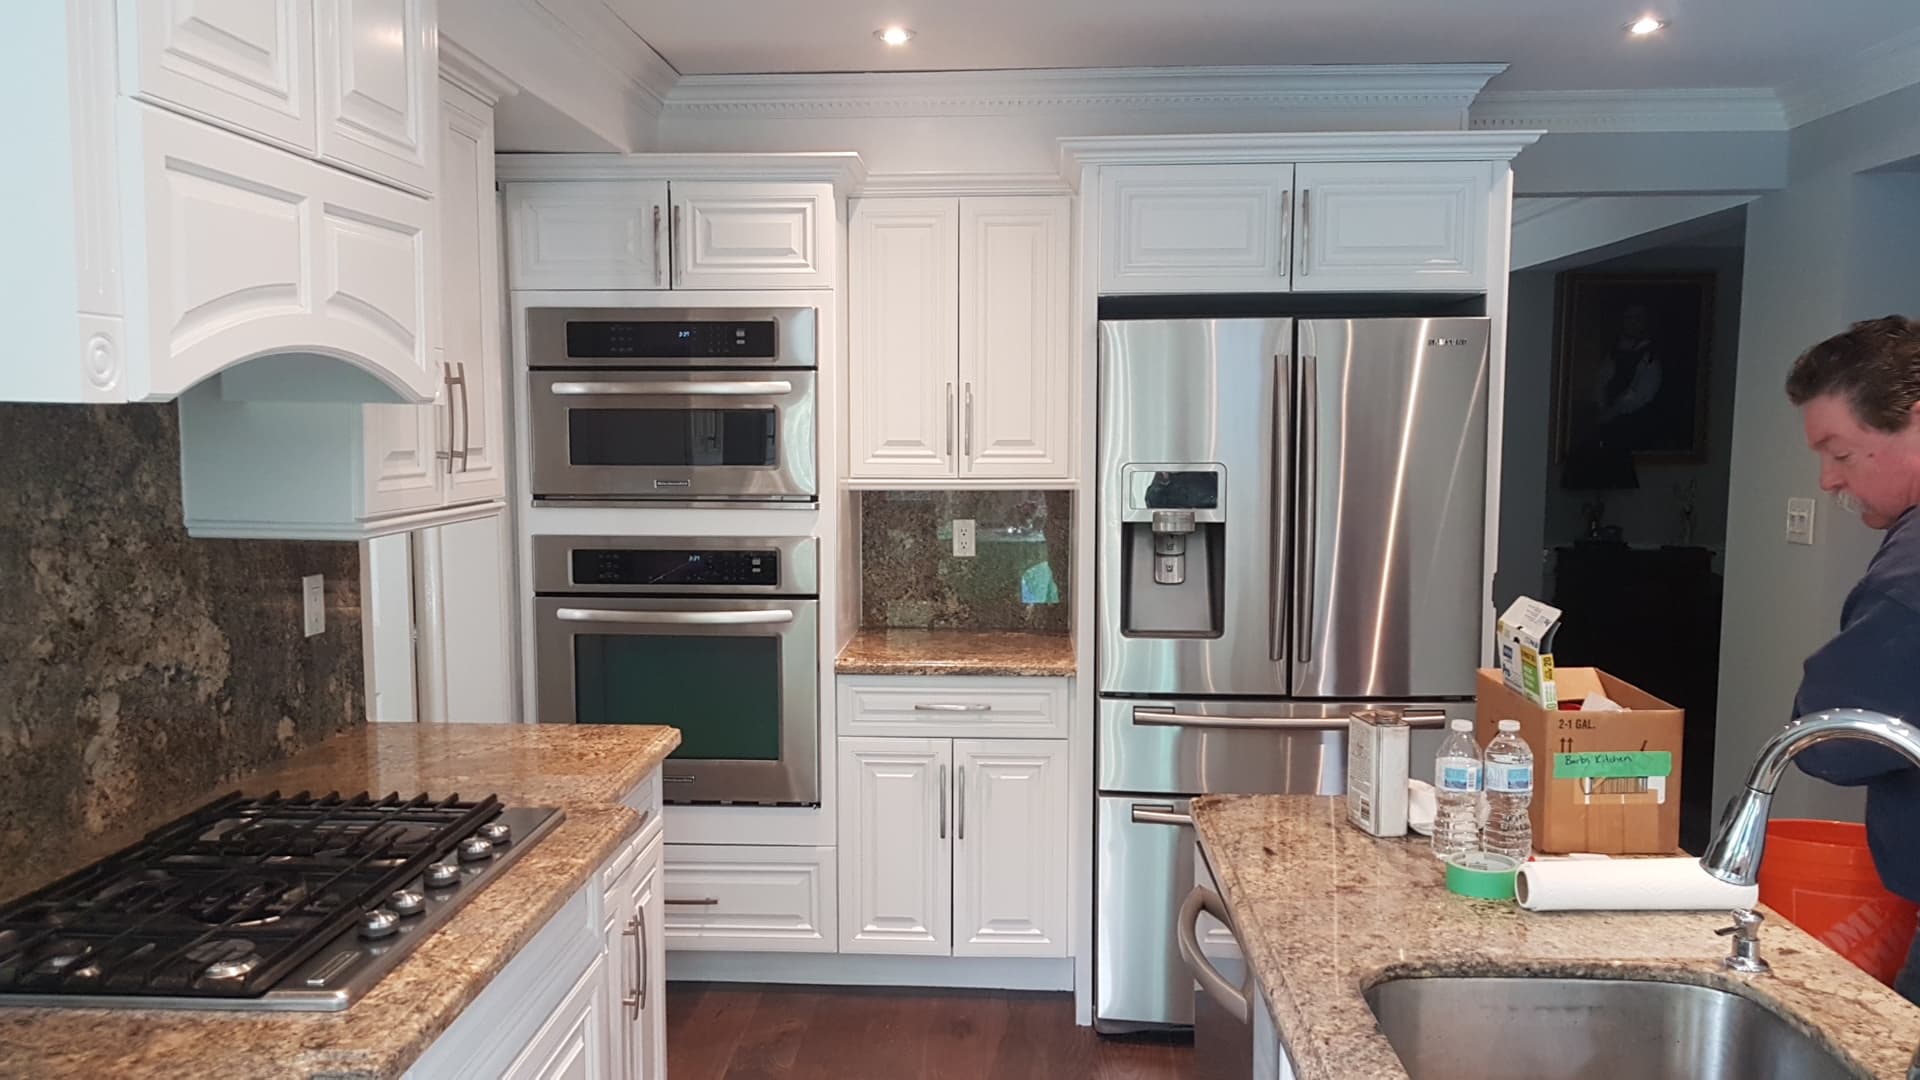 TUP Kitchen Finished painted white Streetsville June 2019.jpg